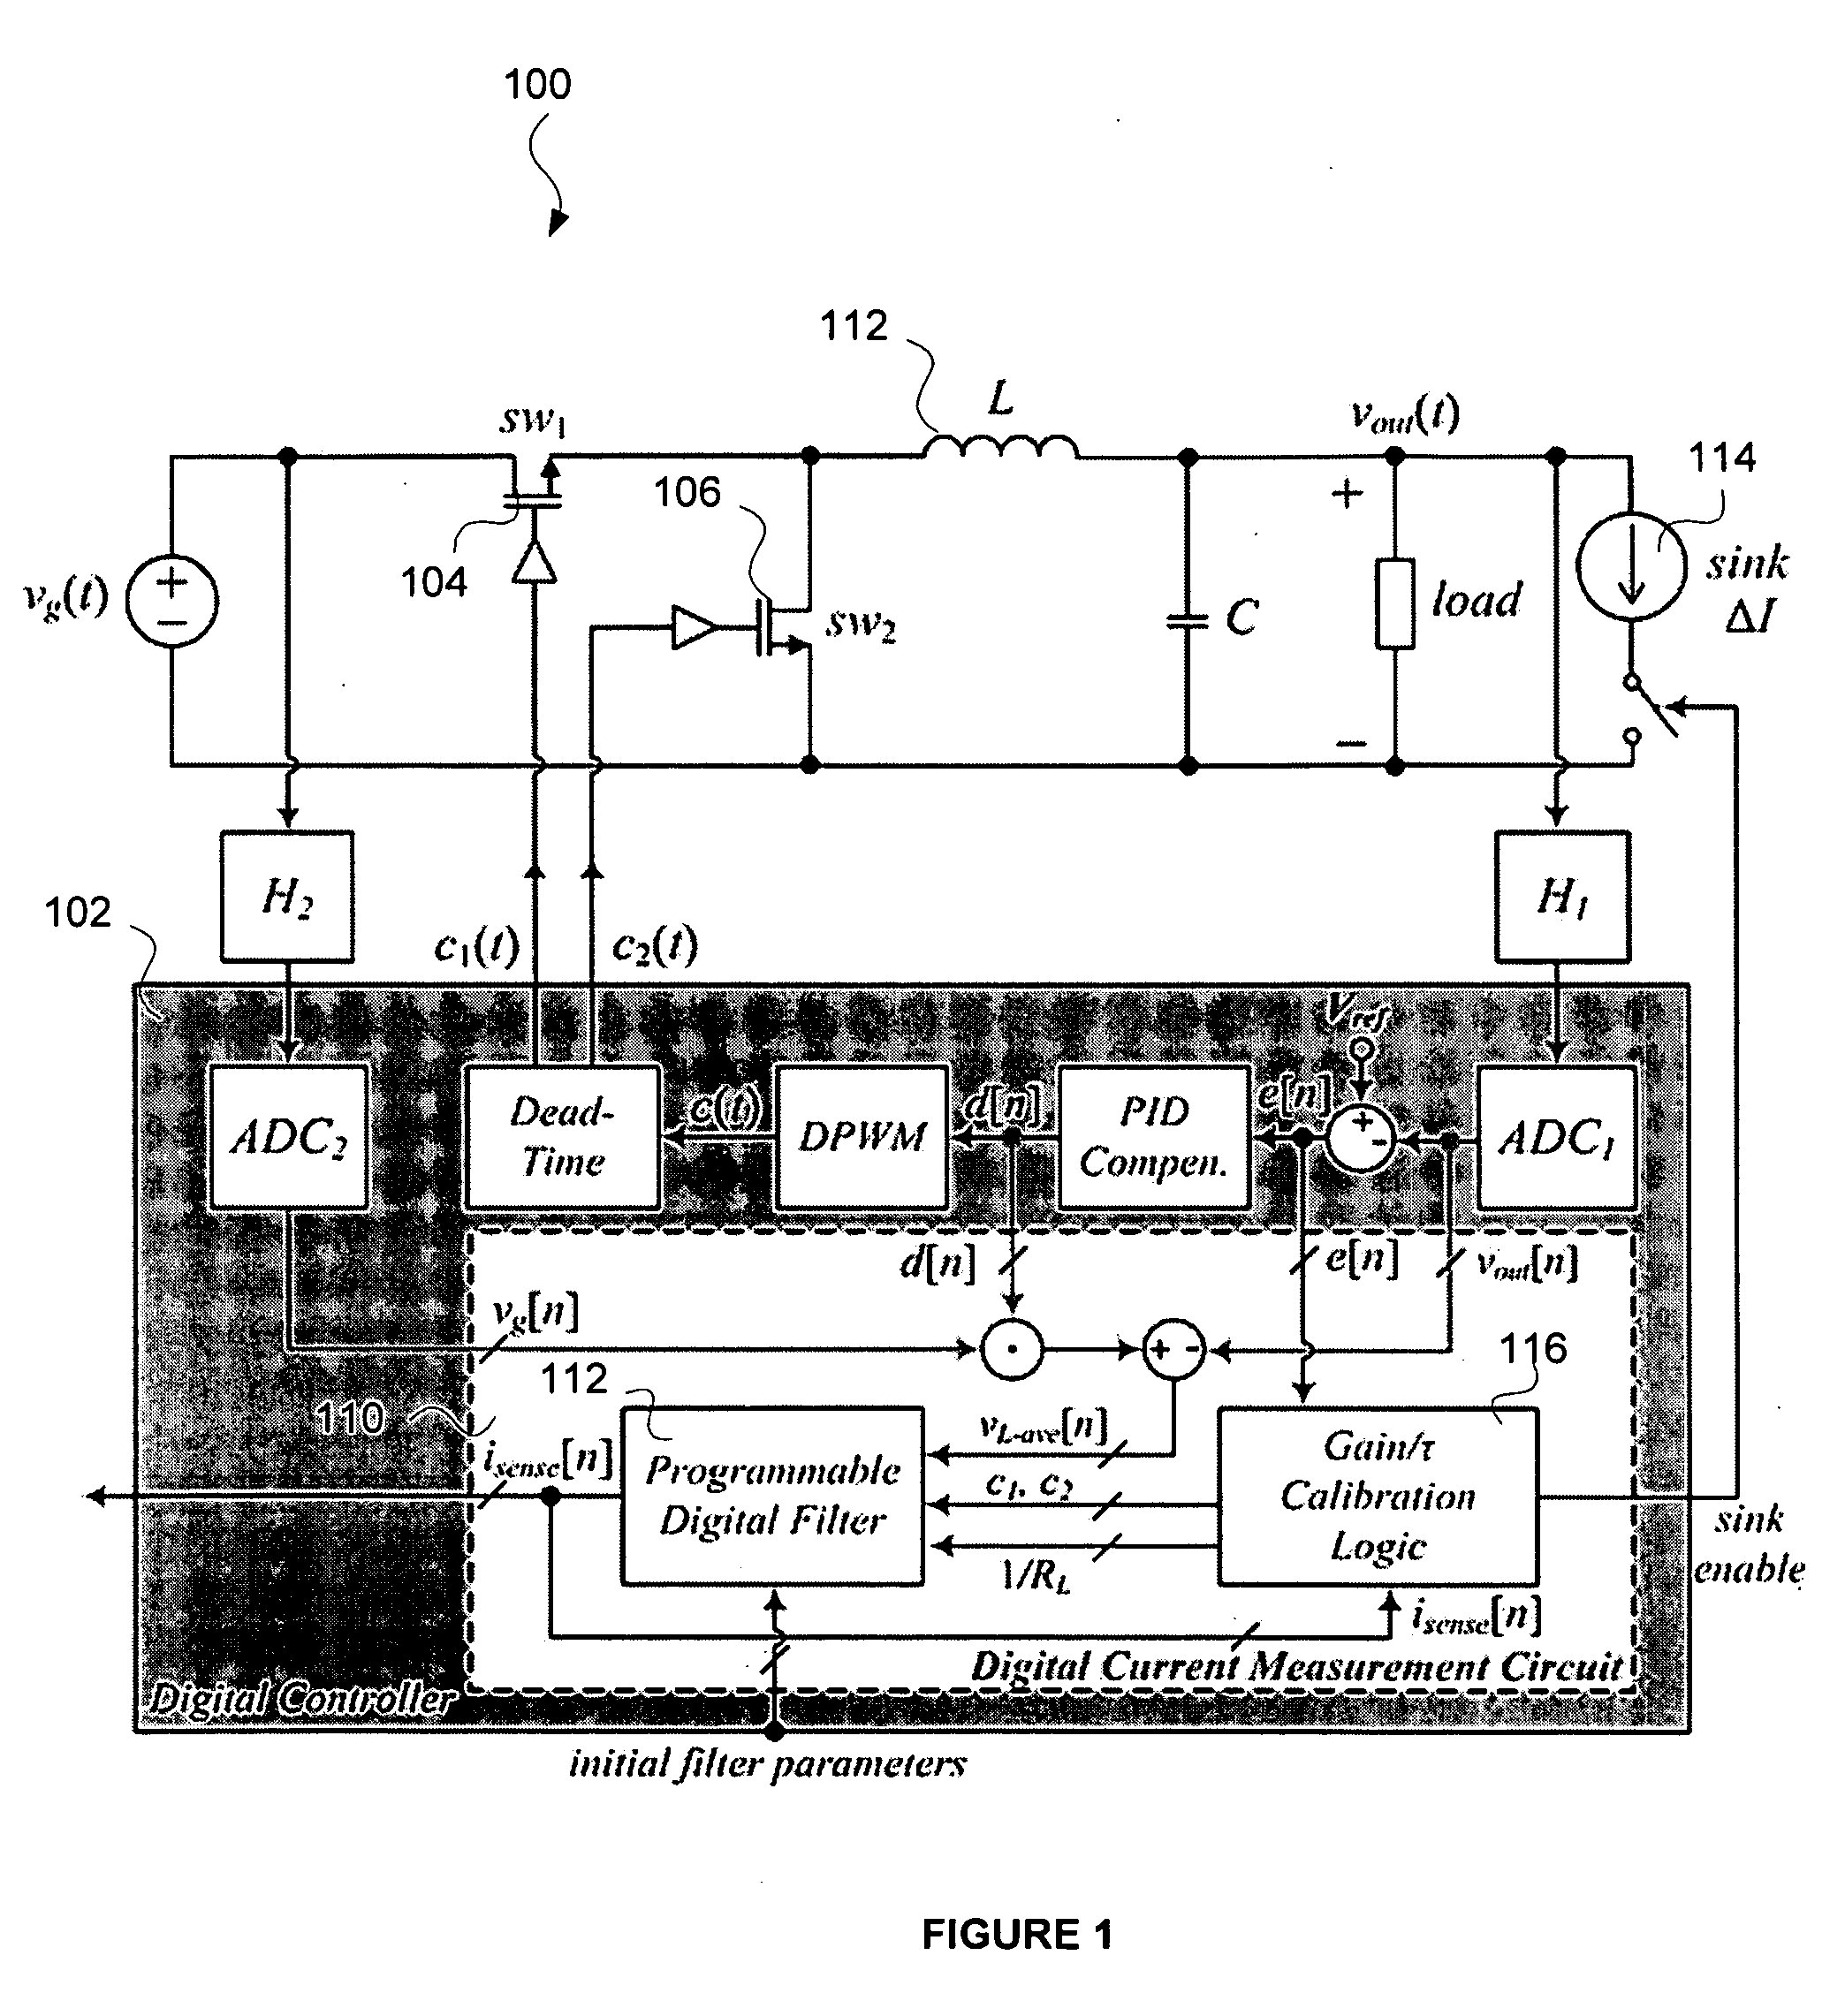 Self-tuning digital current estimator for low-power switching converters